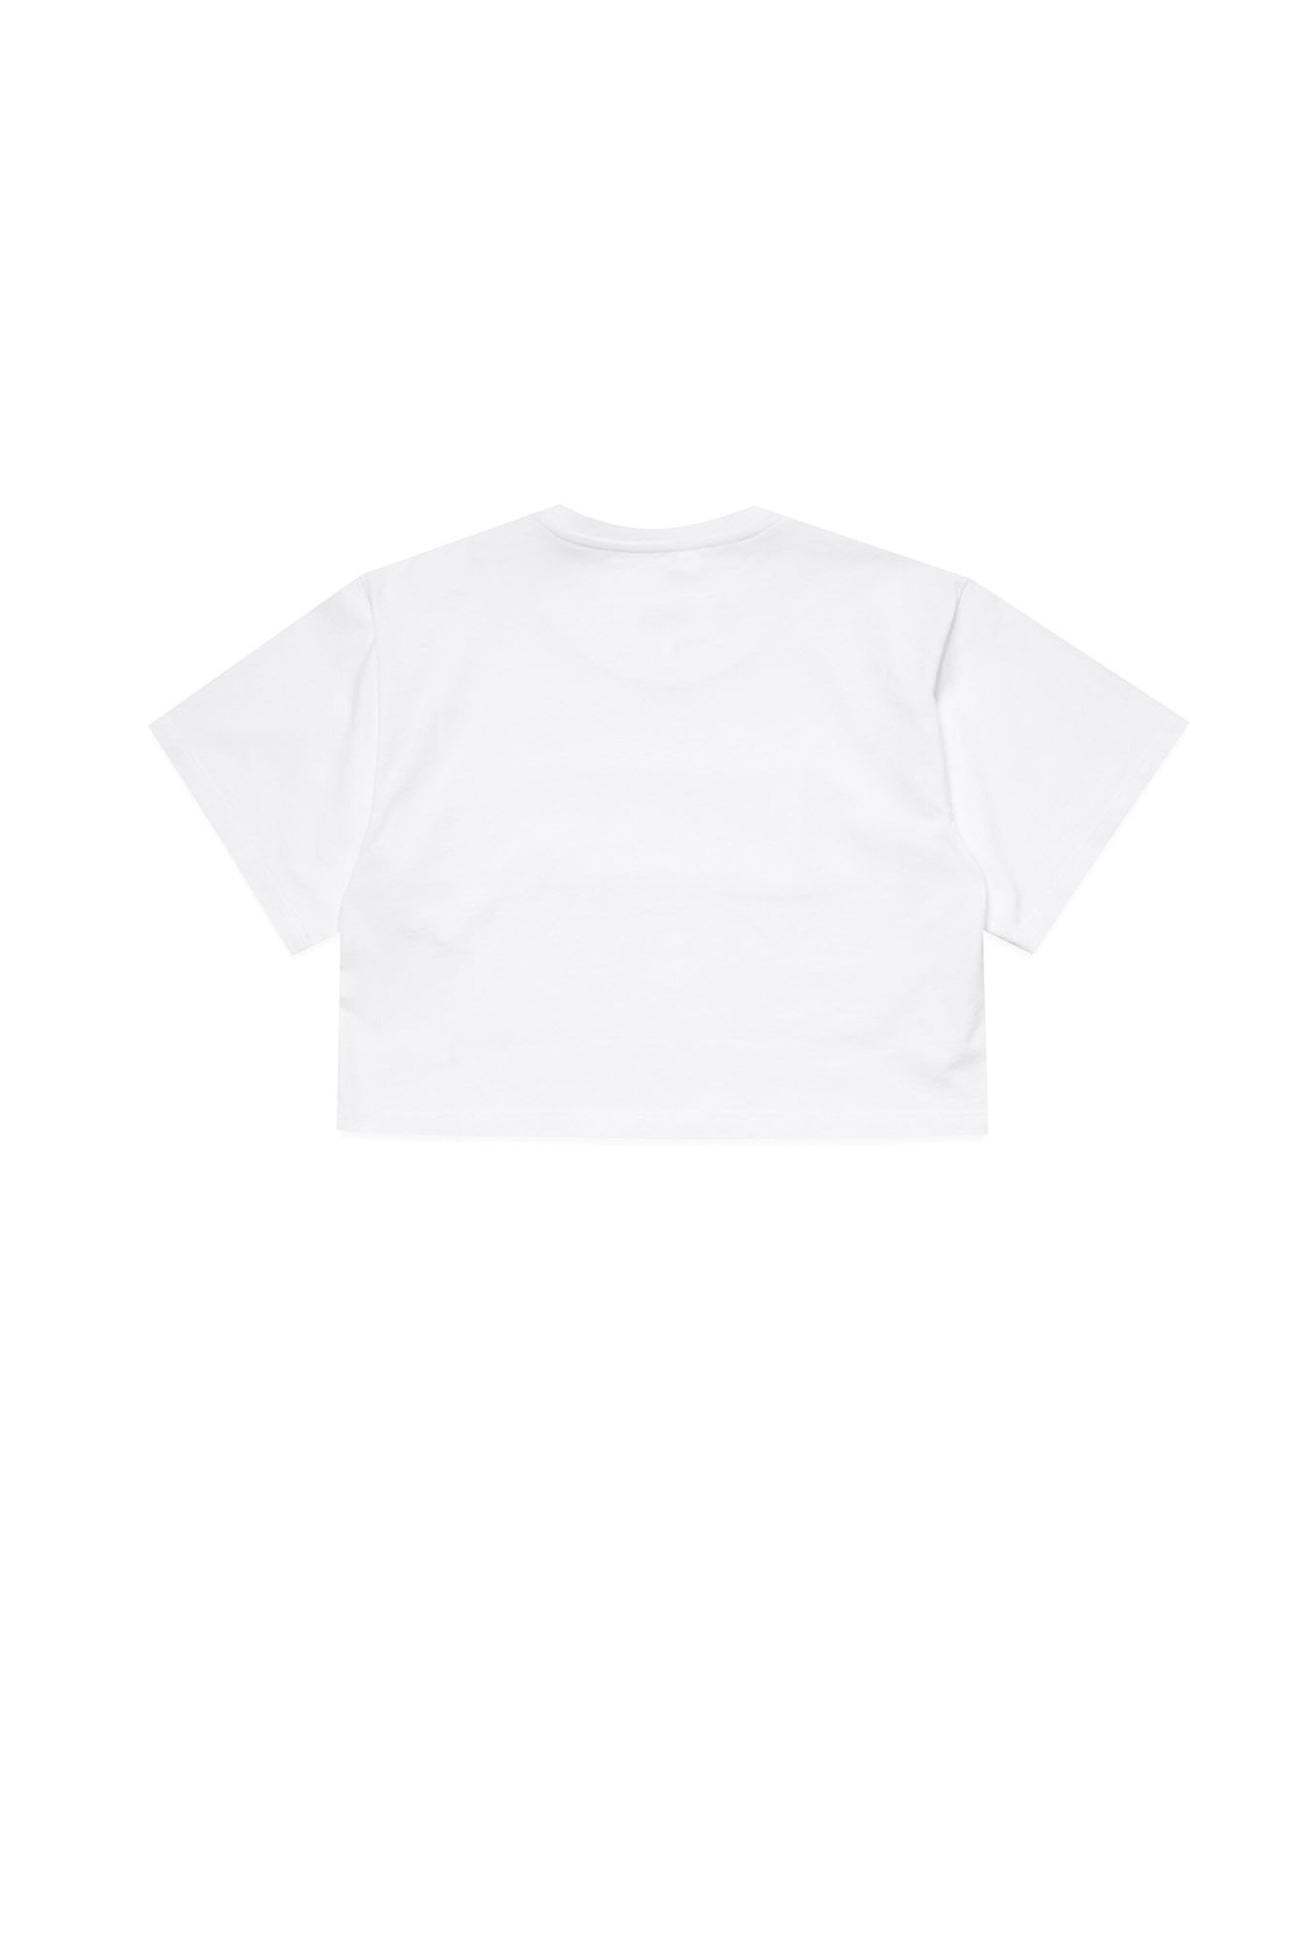 Cropped T-shirt branded with numeric logo Cropped T-shirt branded with numeric logo